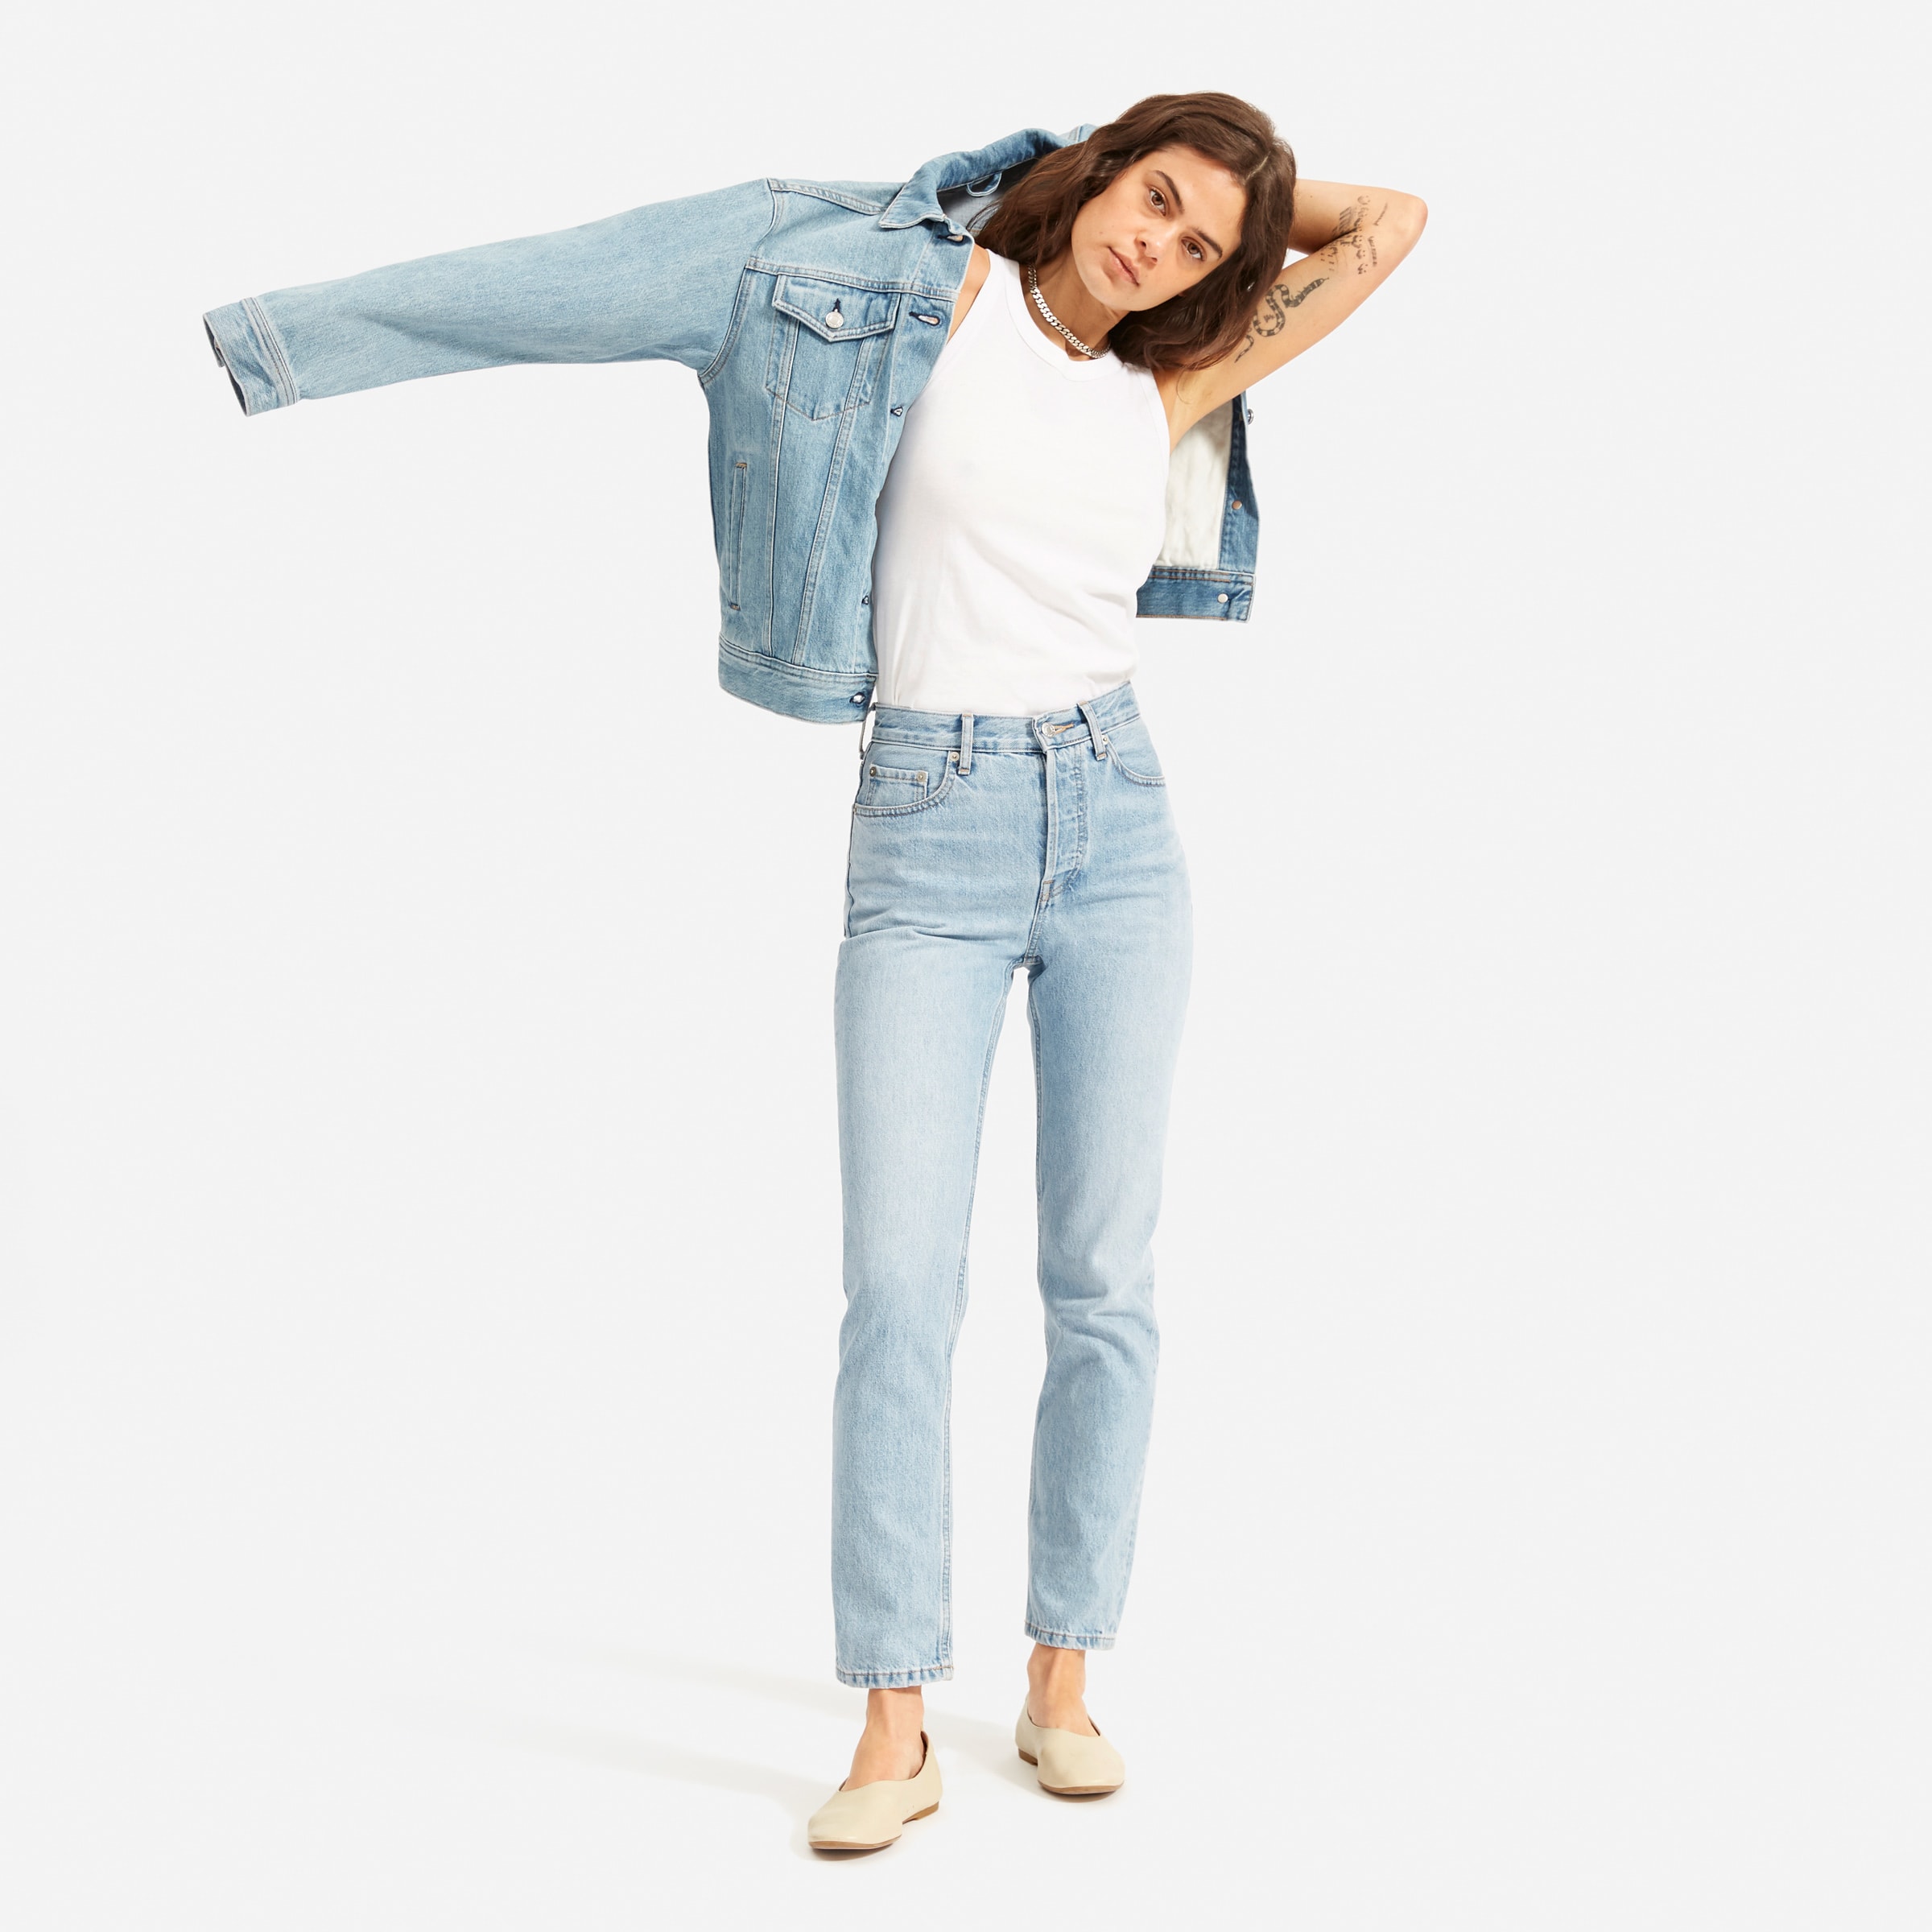 The 18 Best Straight Leg Jeans of 2023